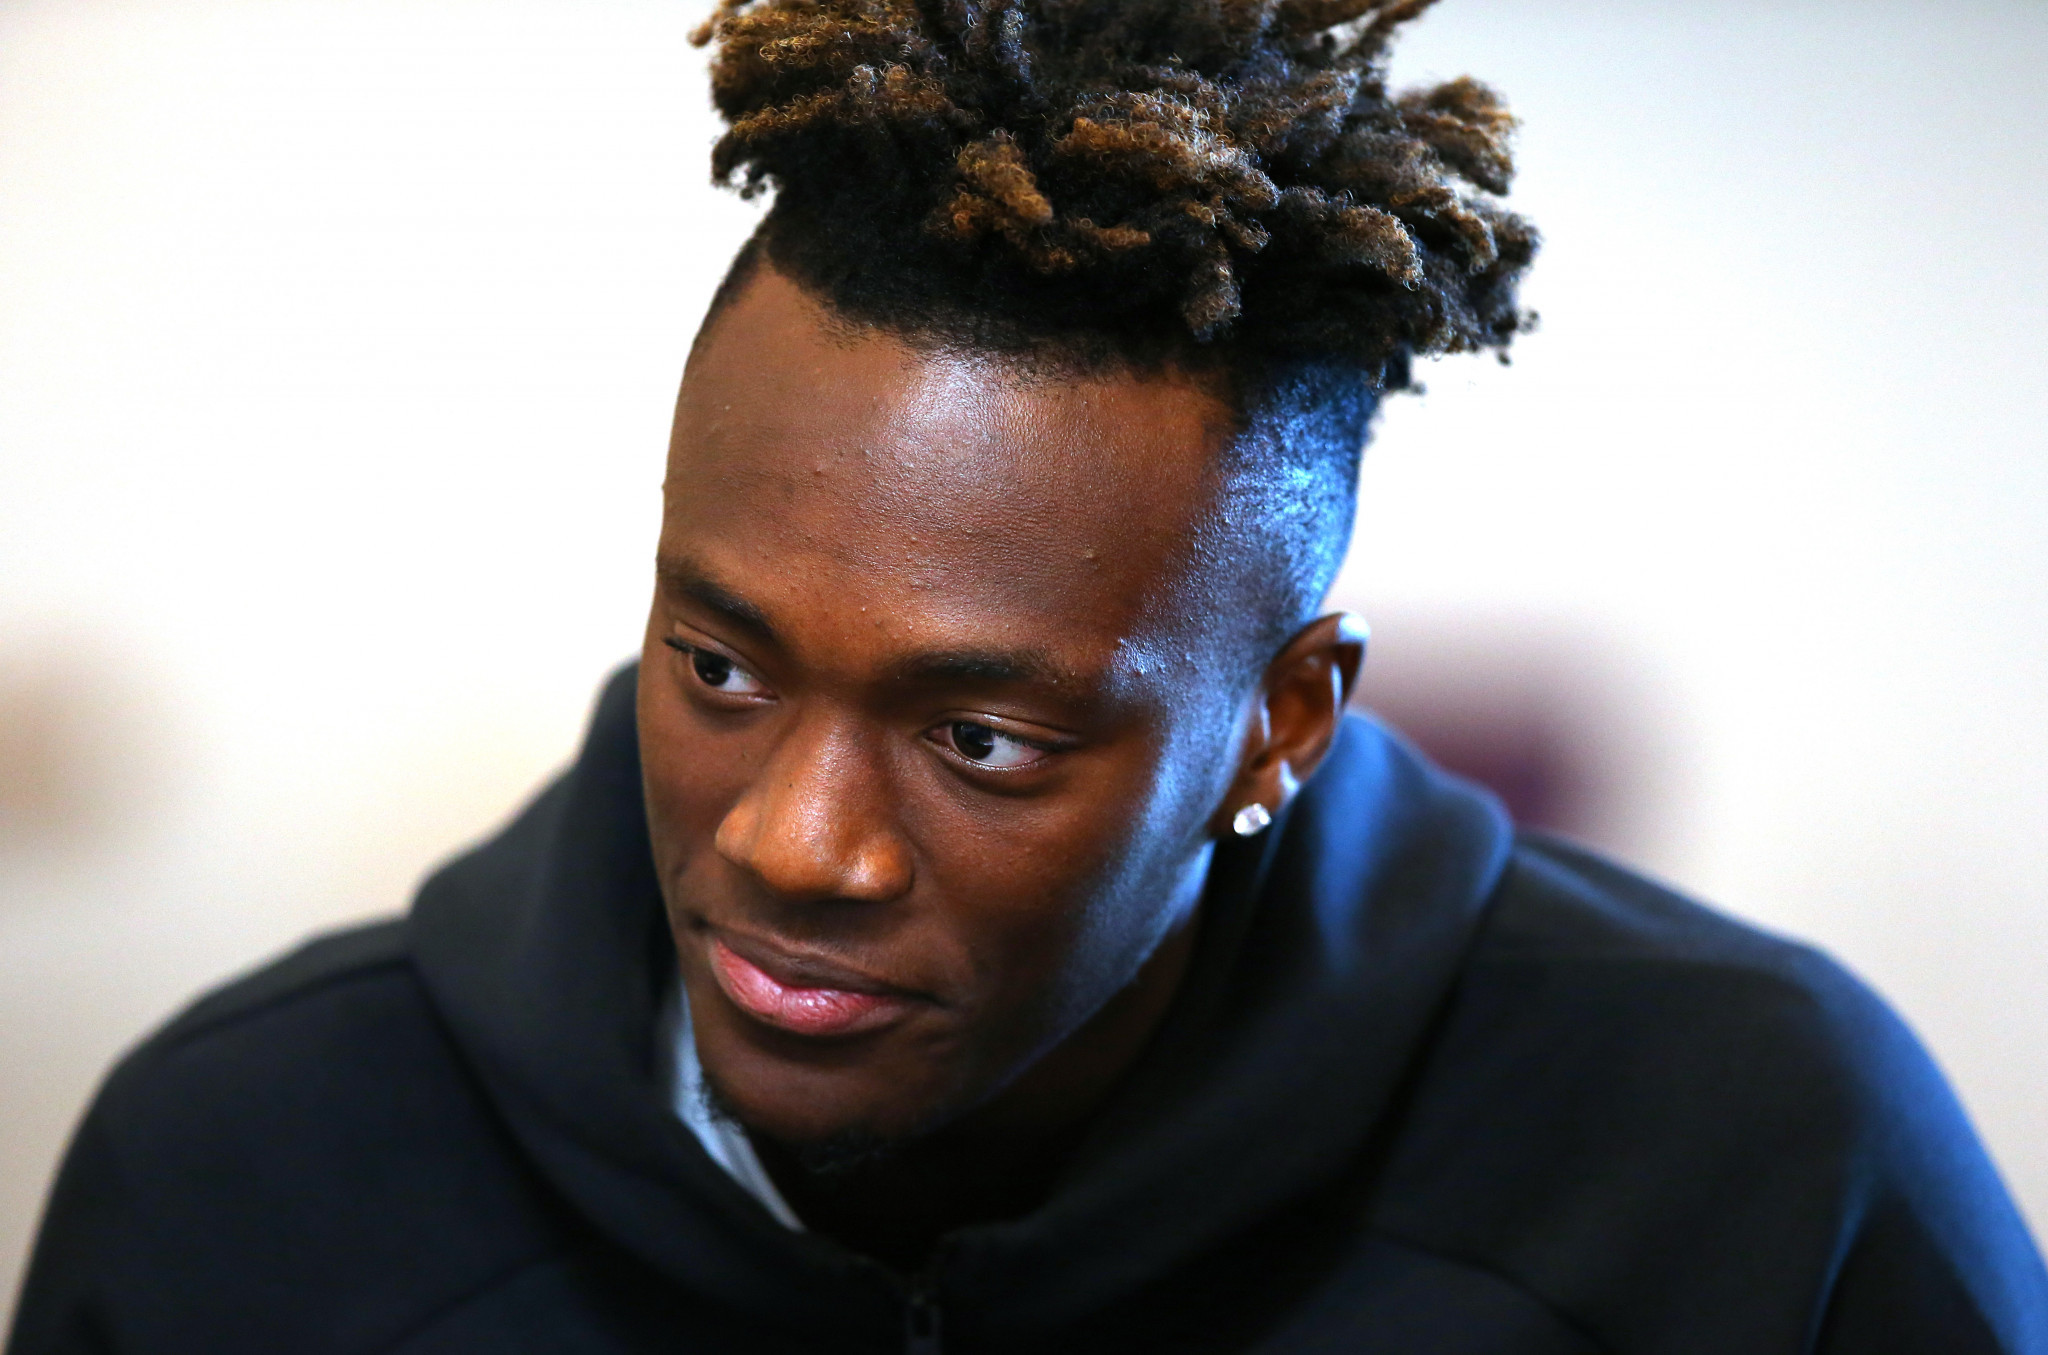 Tammy Abraham said England's players would walk off the pitch if they are racially abused ©Getty Images